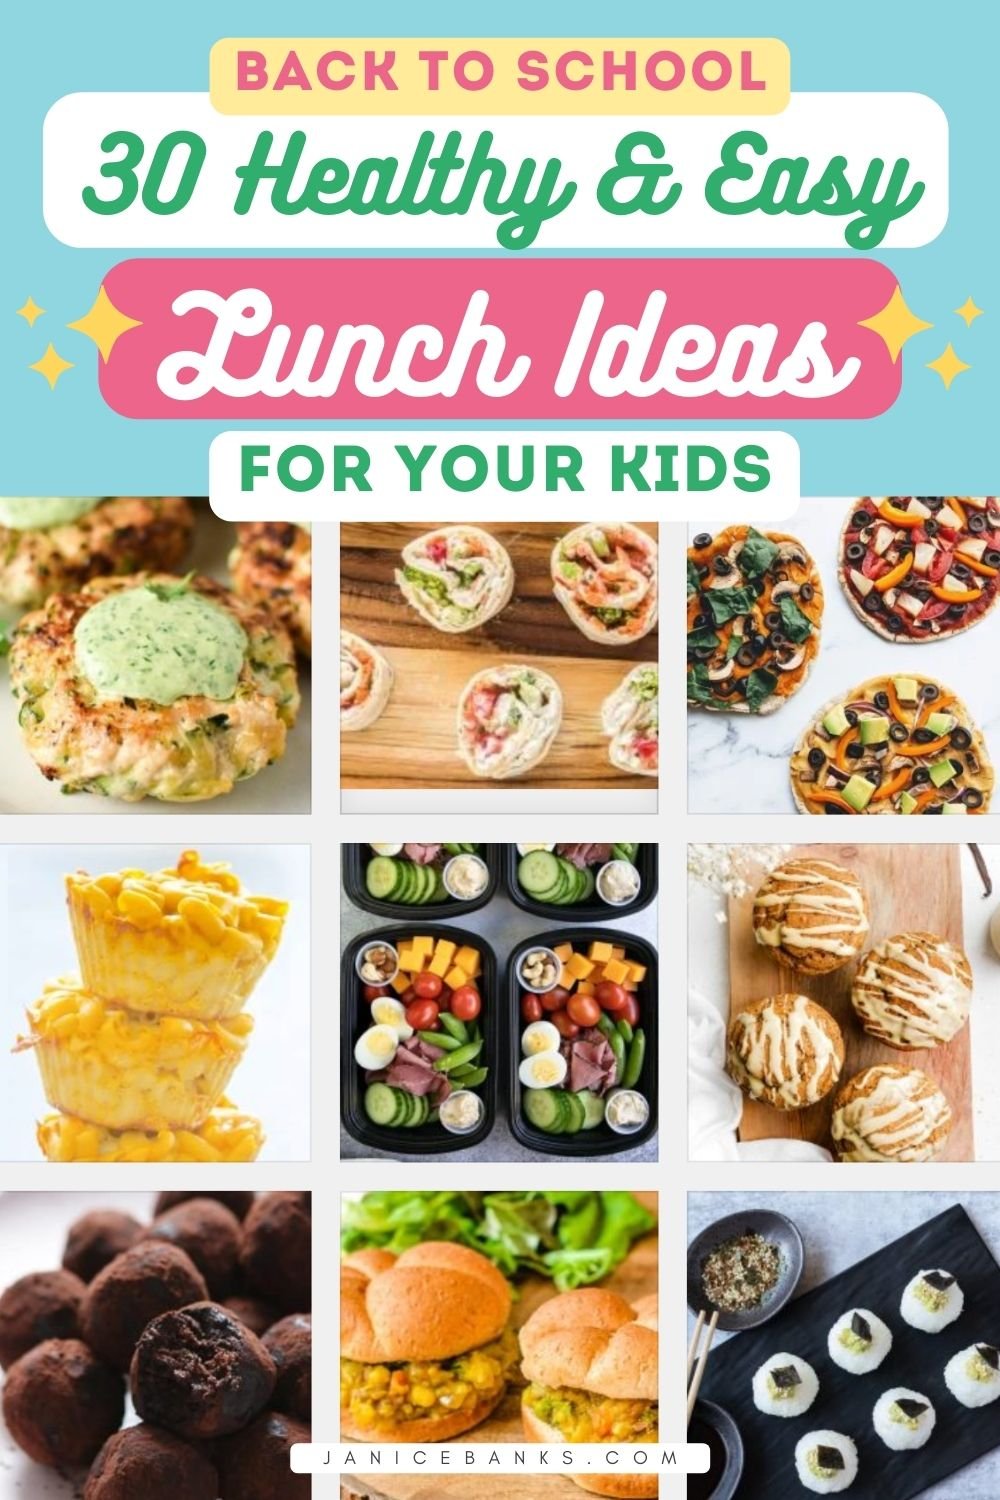 Easy & Healthy Lunch Ideas For Kids